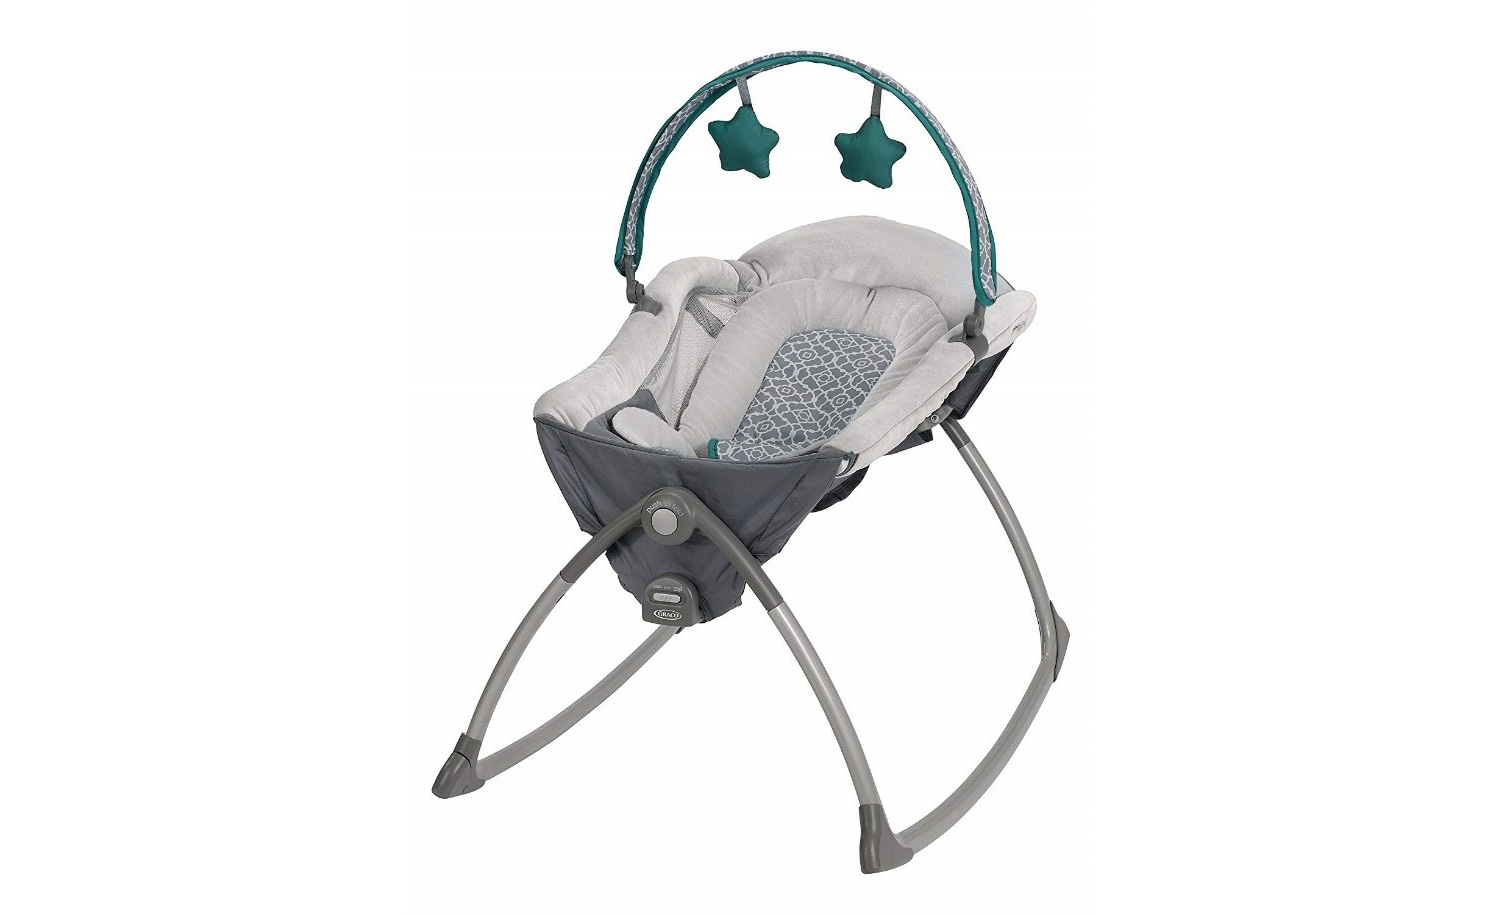 PHOTO: The Consumer Product Safety Commission announced that Graco has recalled their Graco Little Lounger Rocking Seat to, "prevent risk of suffocation."